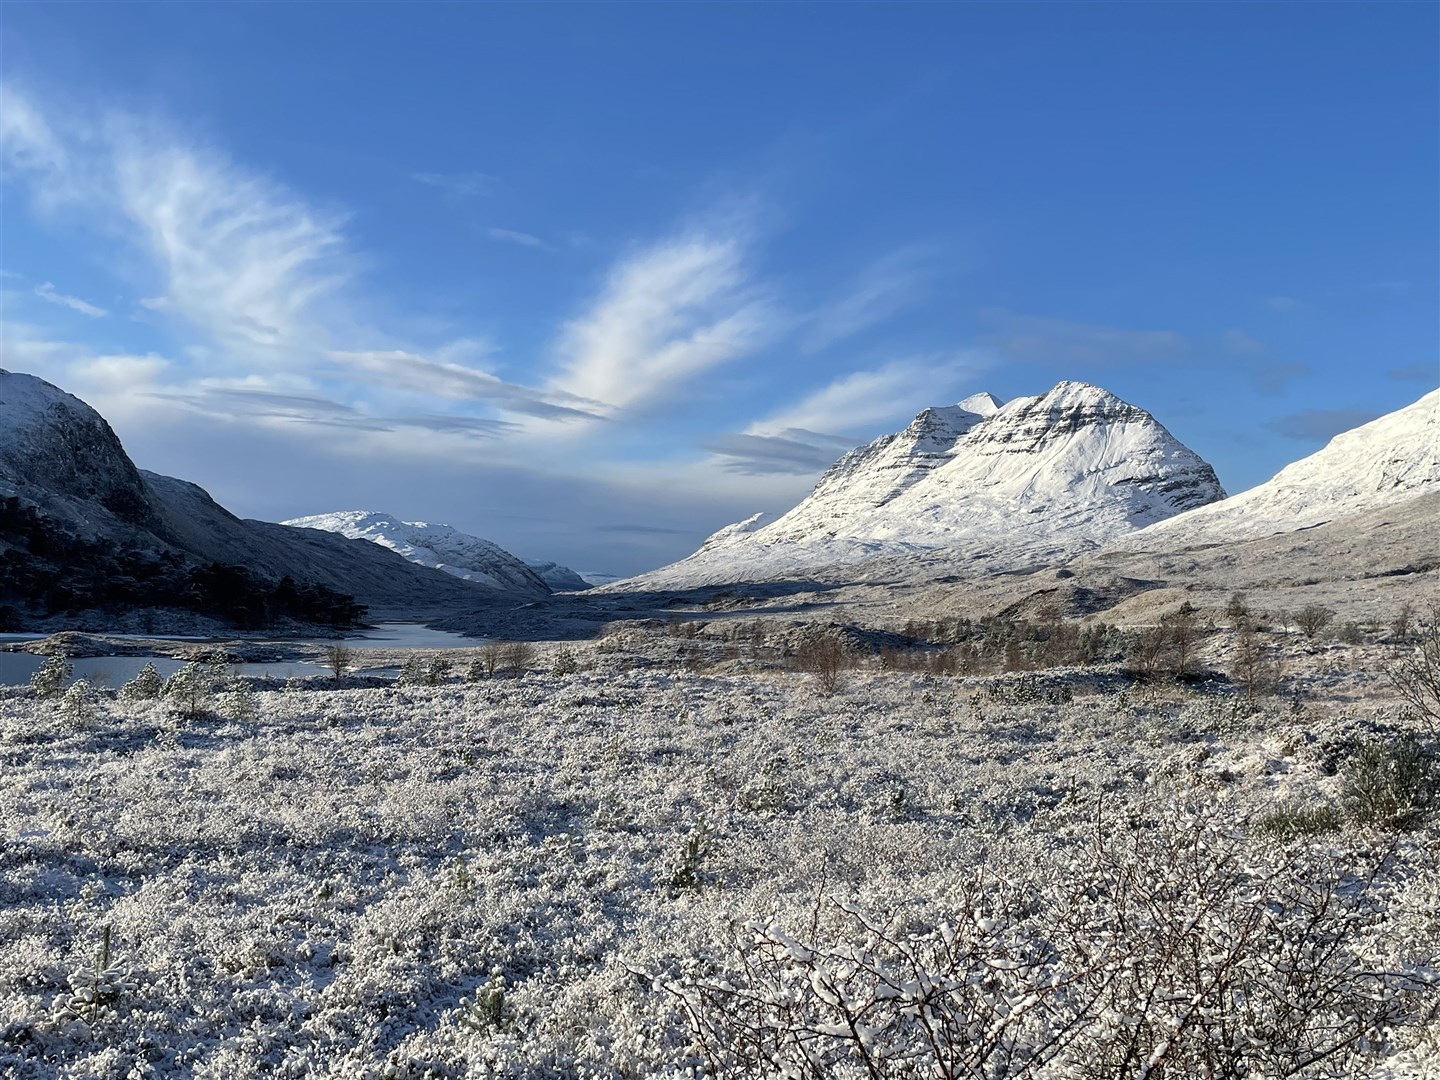 Snapped this whilst showing my Granddaughter the sights on her visit to us last week. It’s the Torridon Mountains from the roadside, with Liathach in the centre, on what was a stunningly beautiful day.